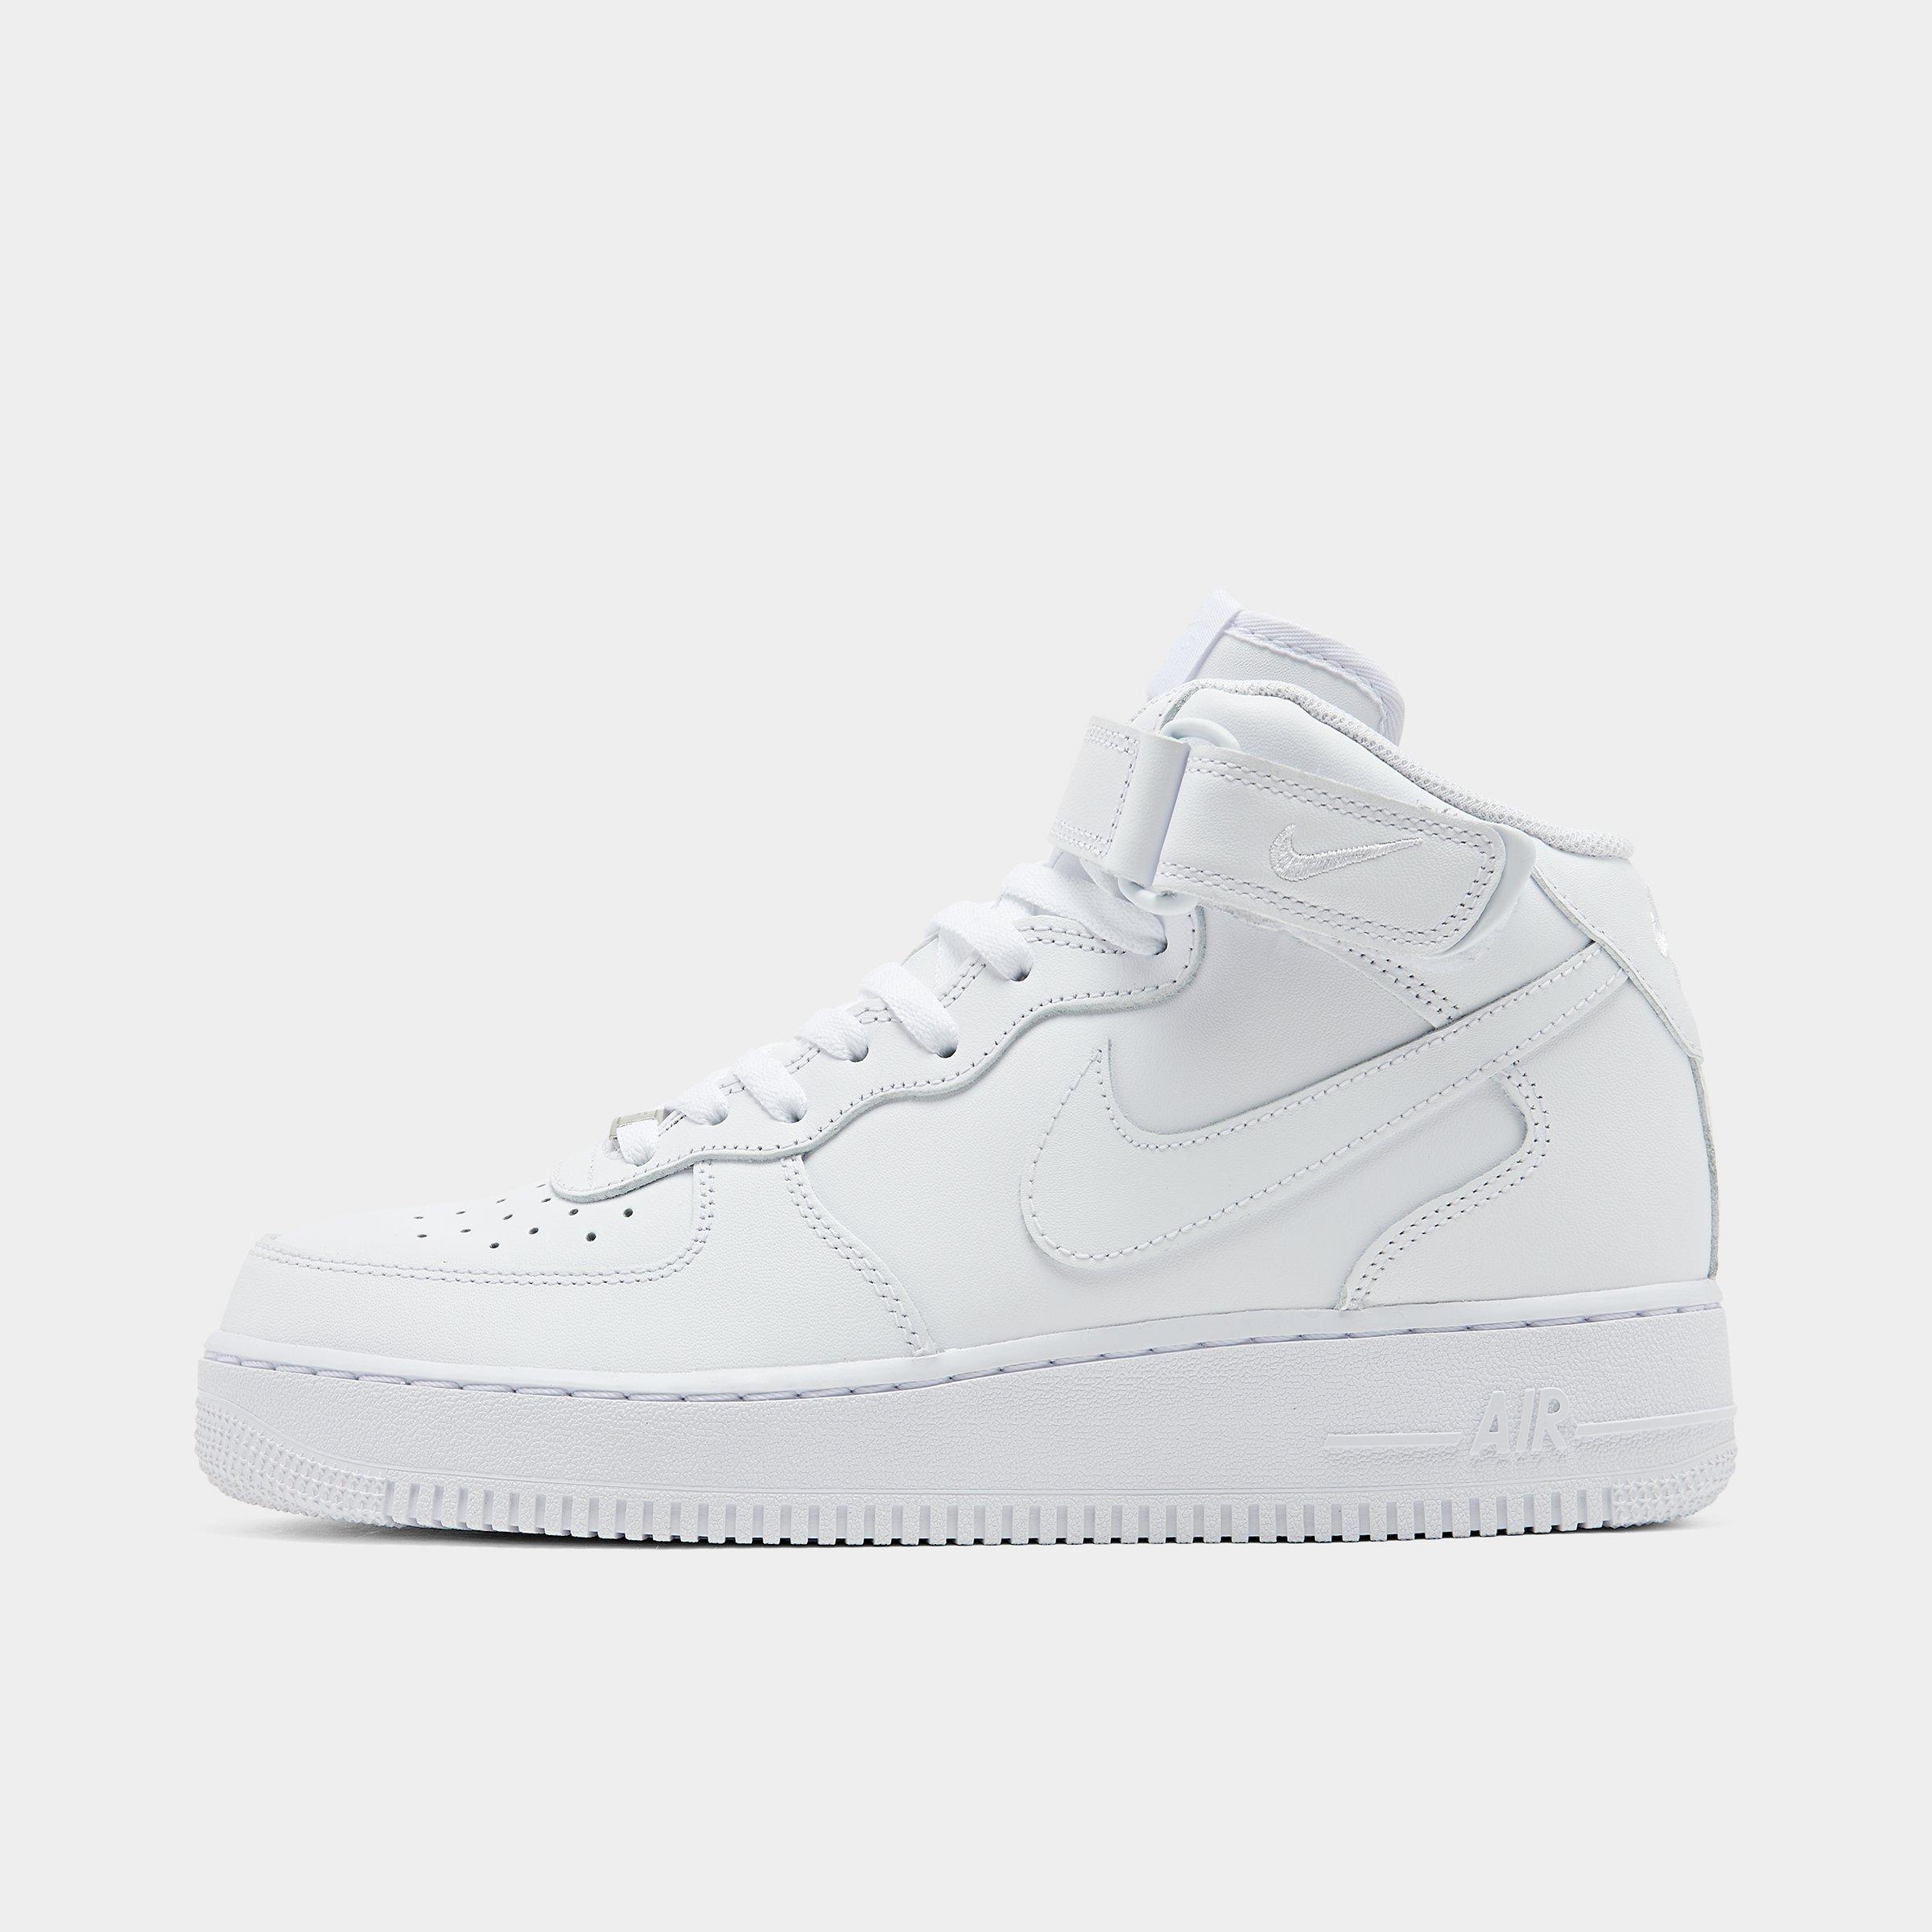 finish line nike air force cheap online